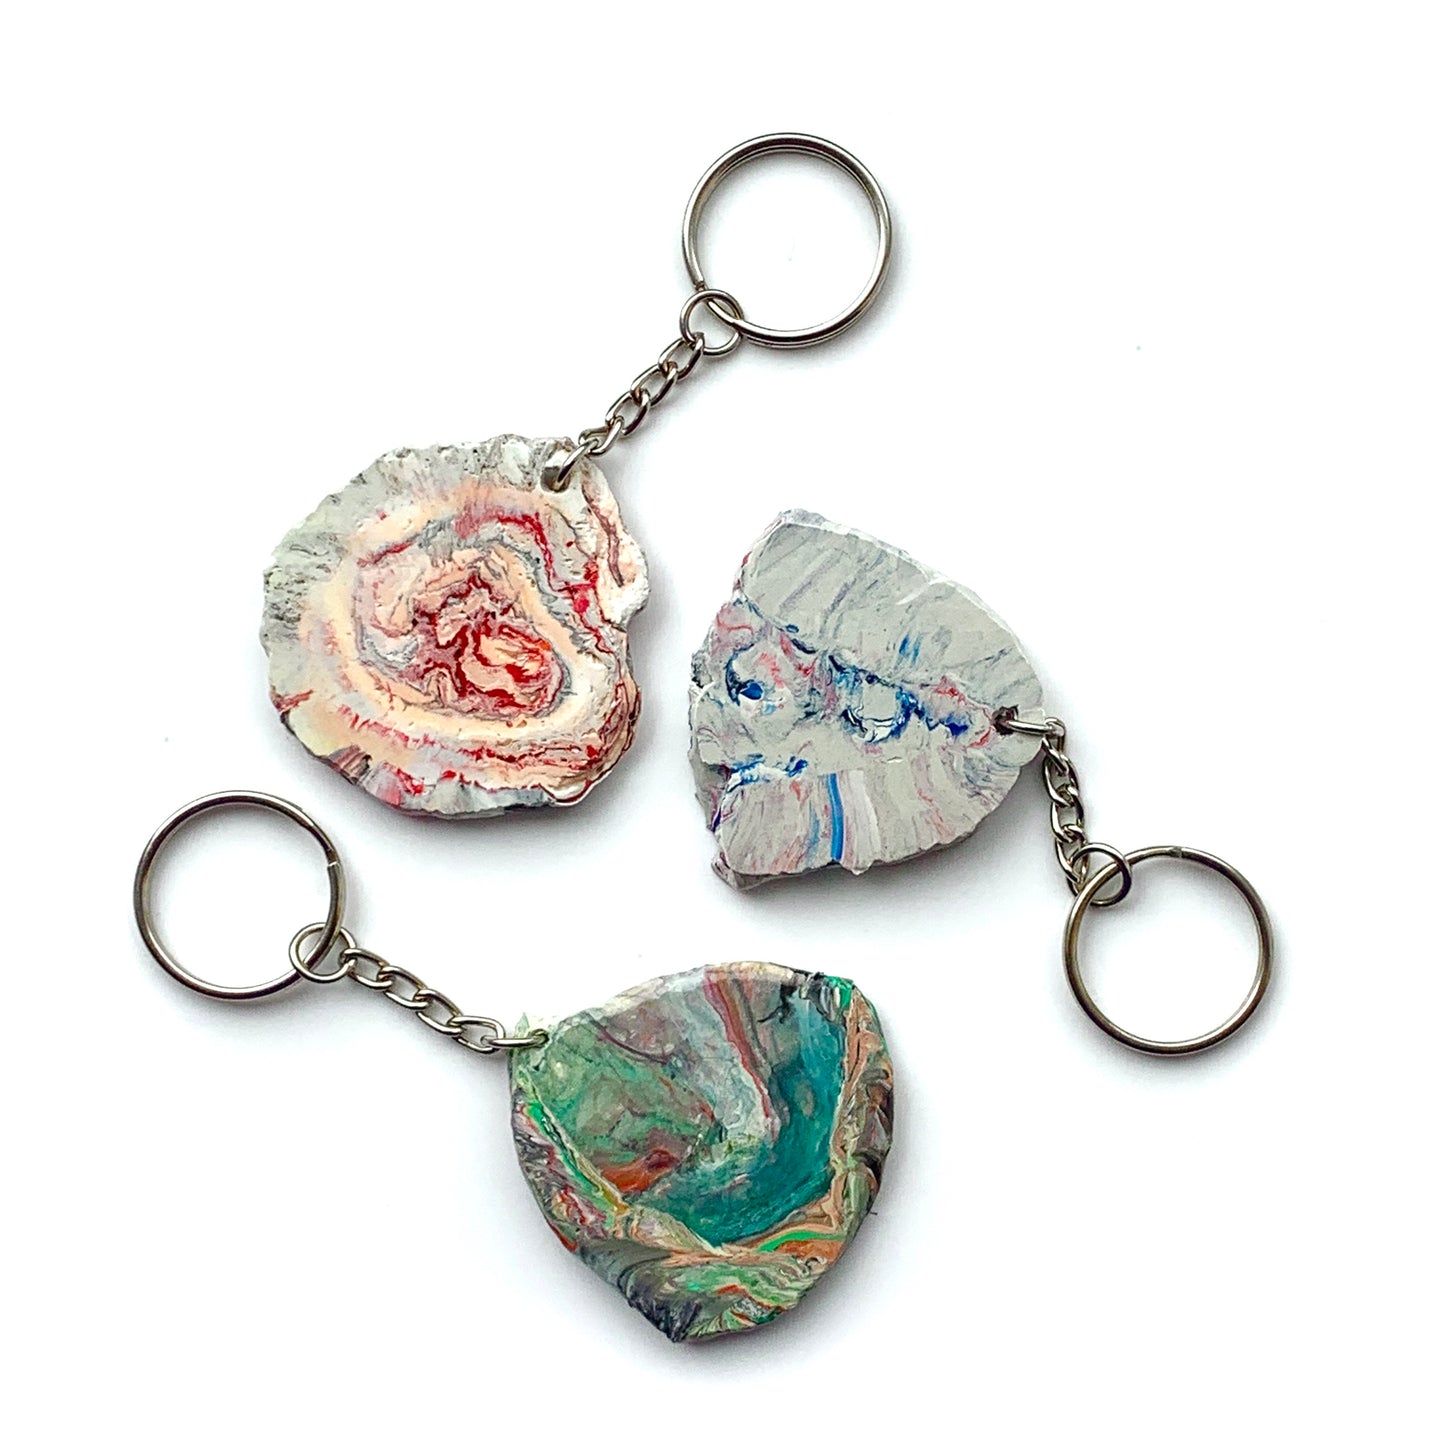 Key ring made of recycled plastic bags ban plastic bag 